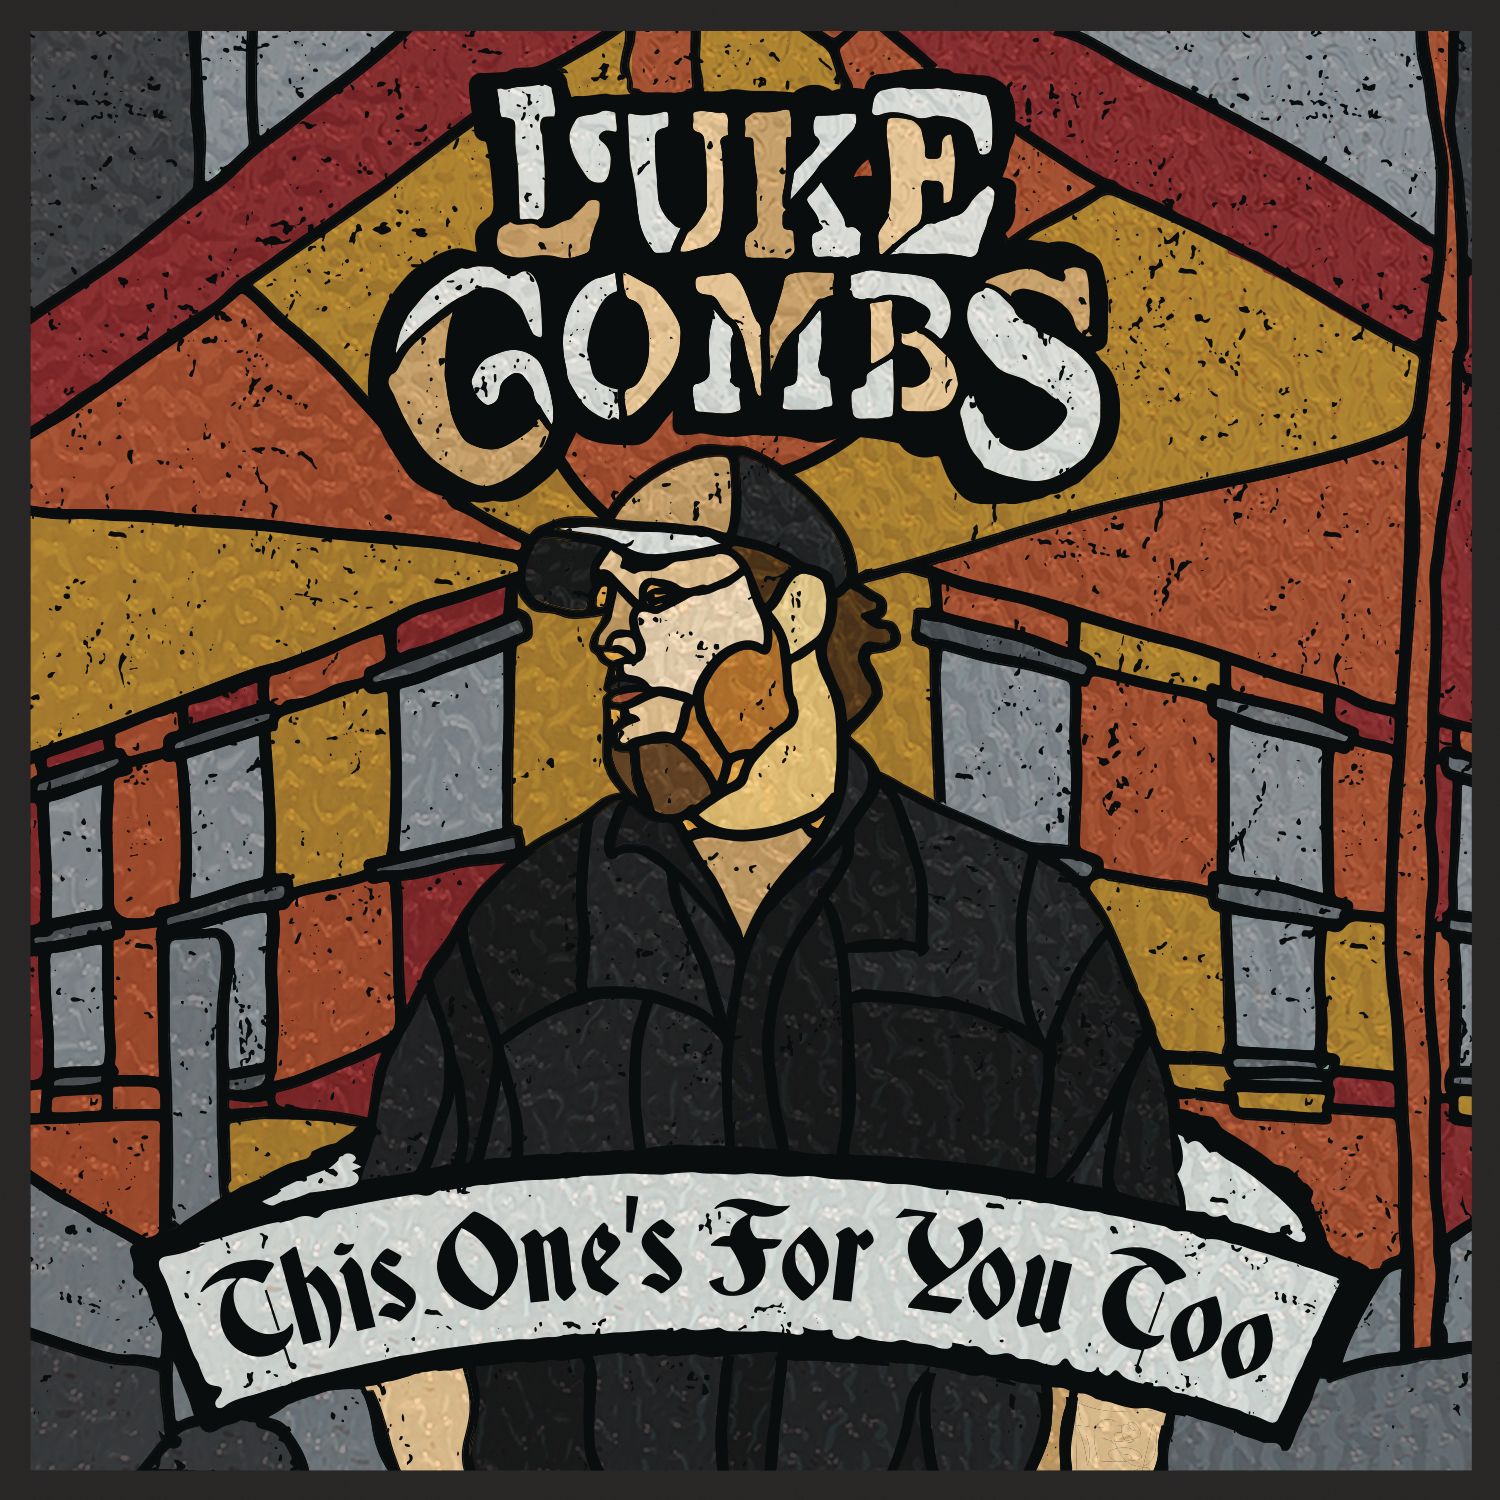 Luke Combs - This One's For You Too Album Cover